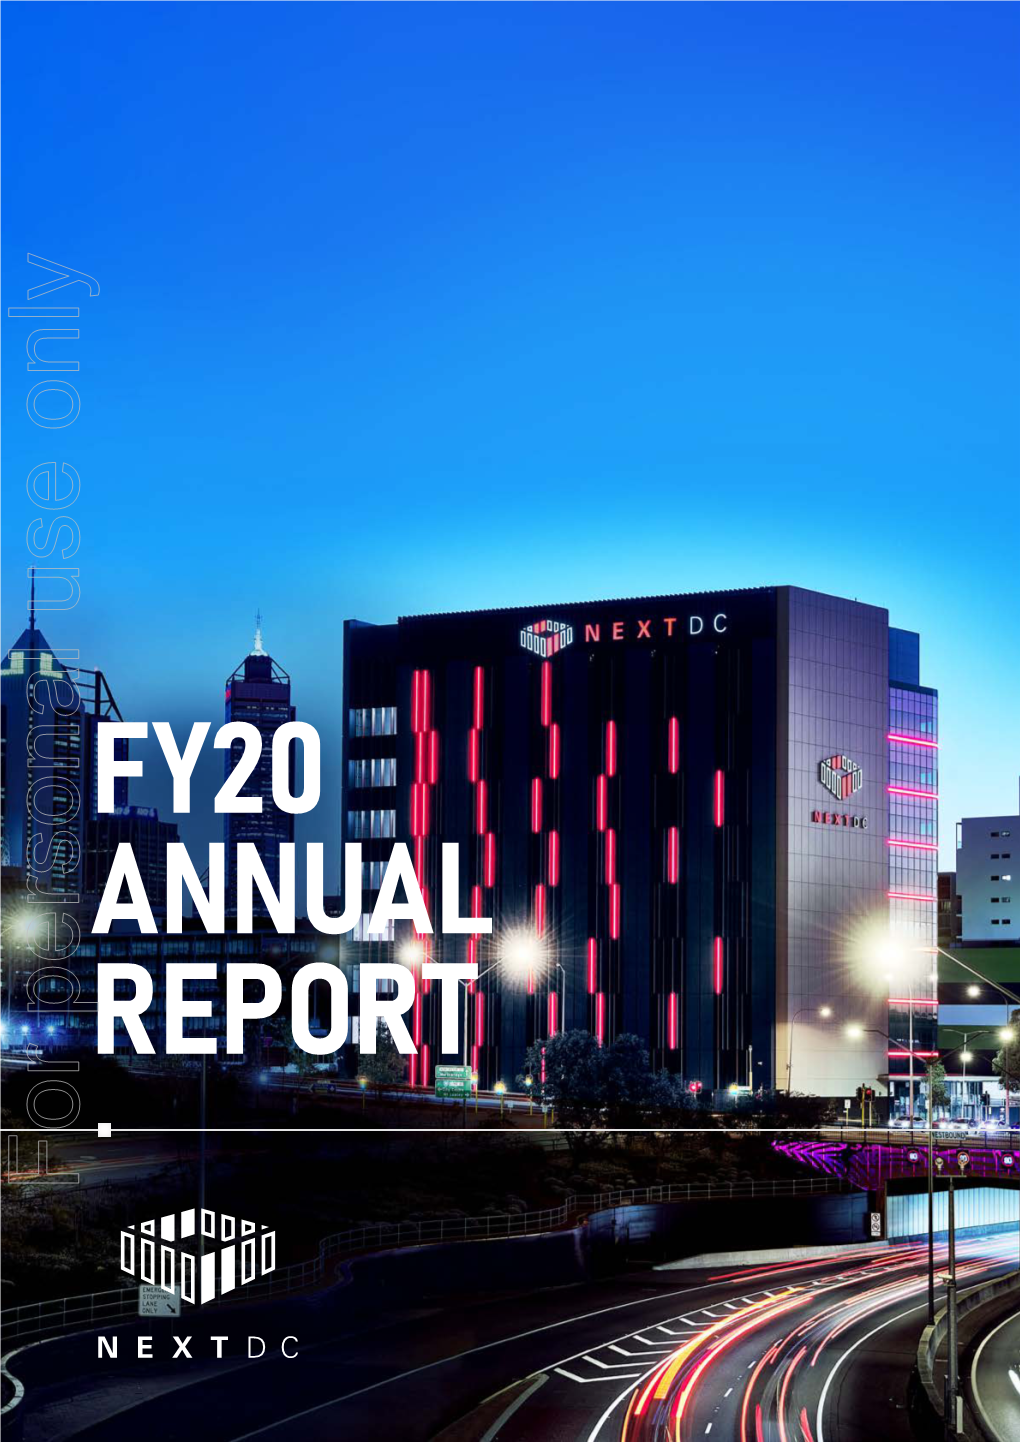 FY20 Annual Report 2 Highlights 4